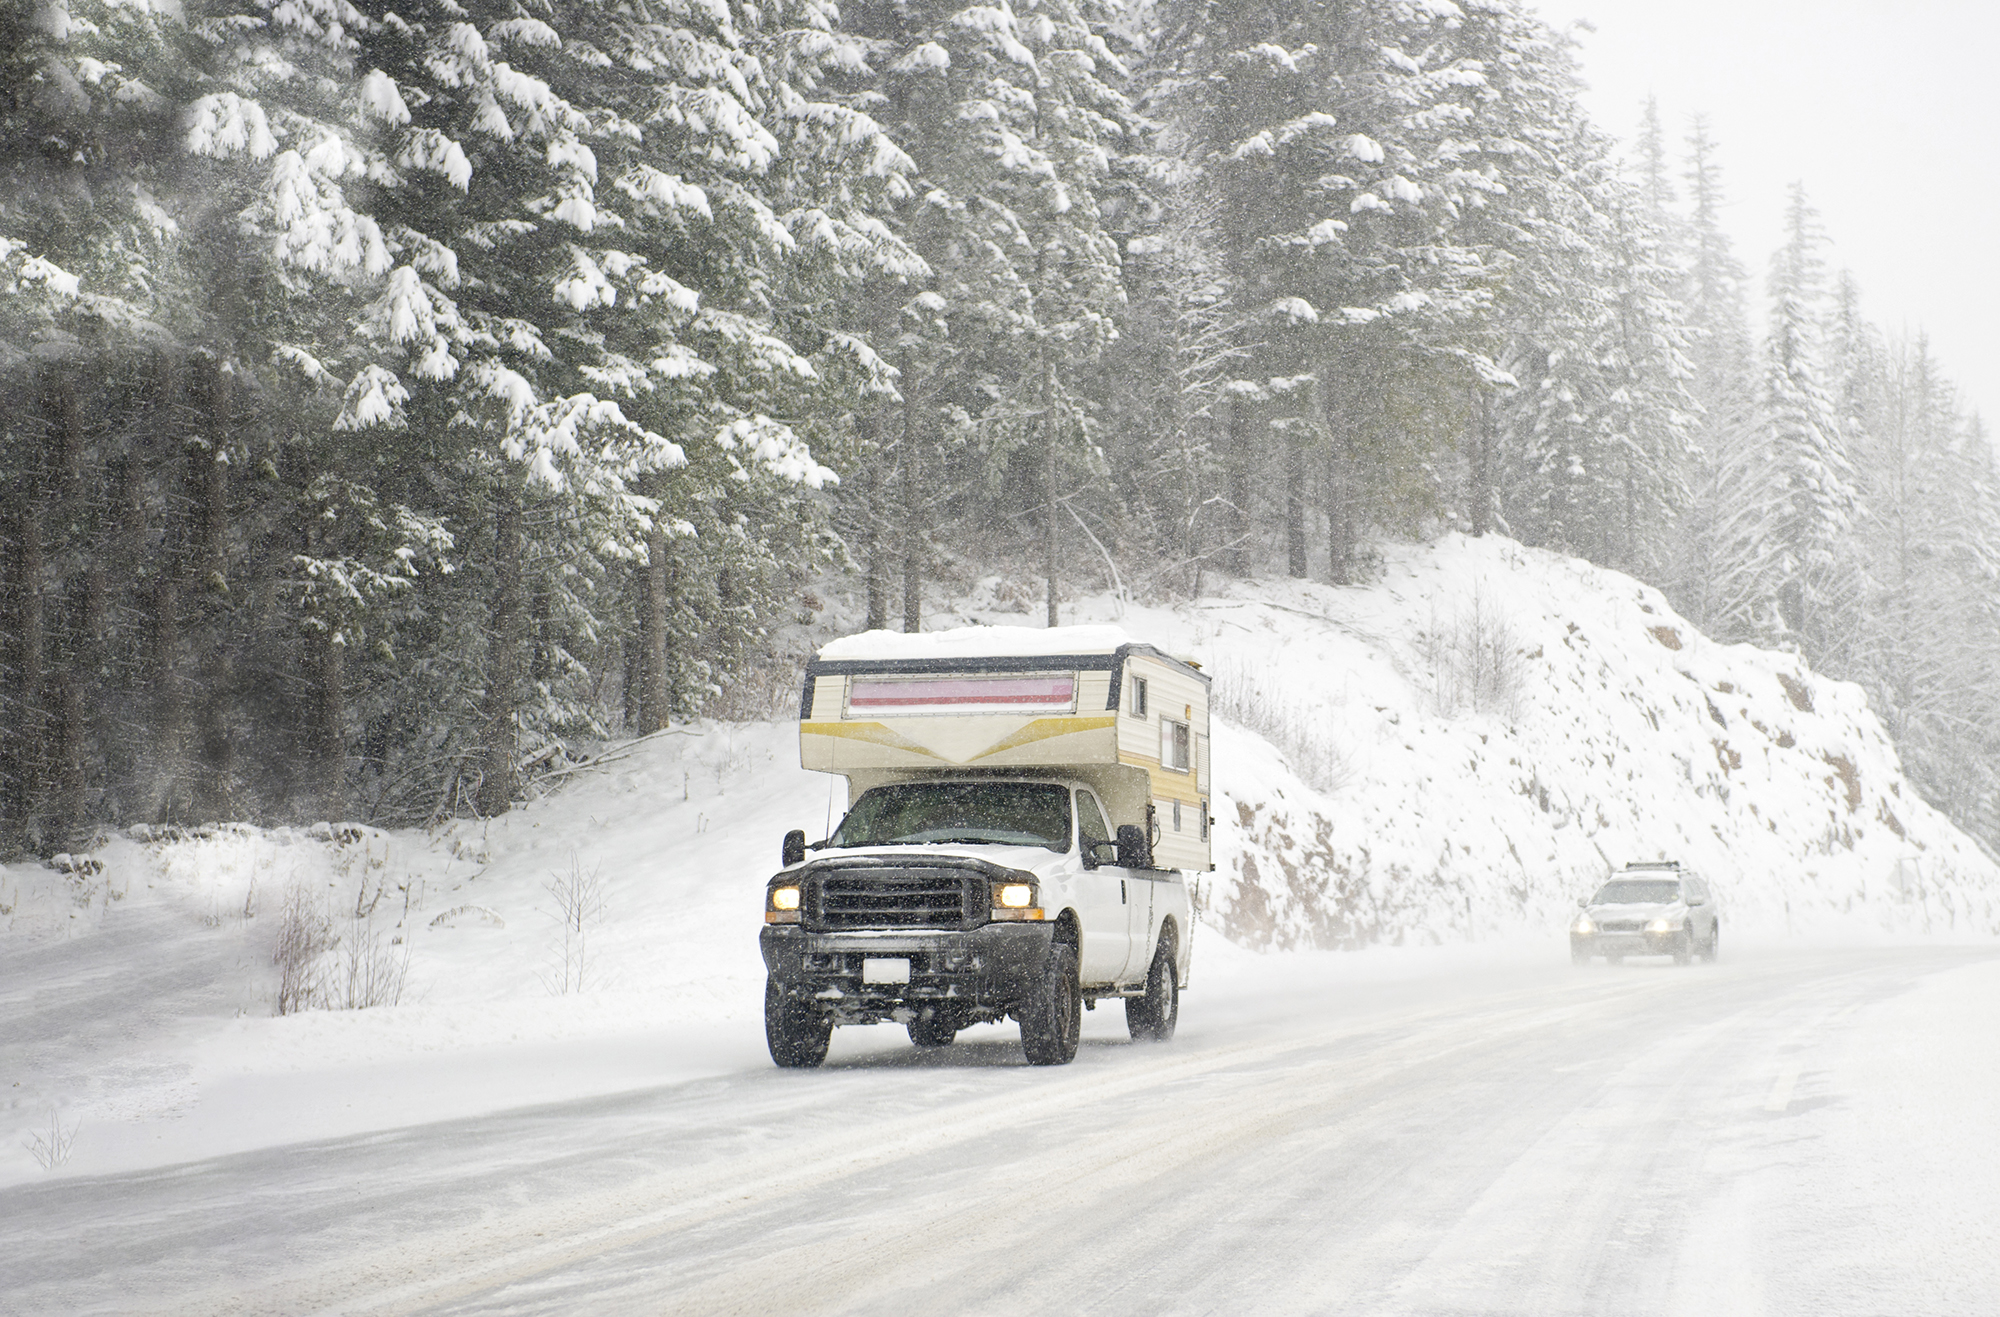 Truck camper in extreme snow